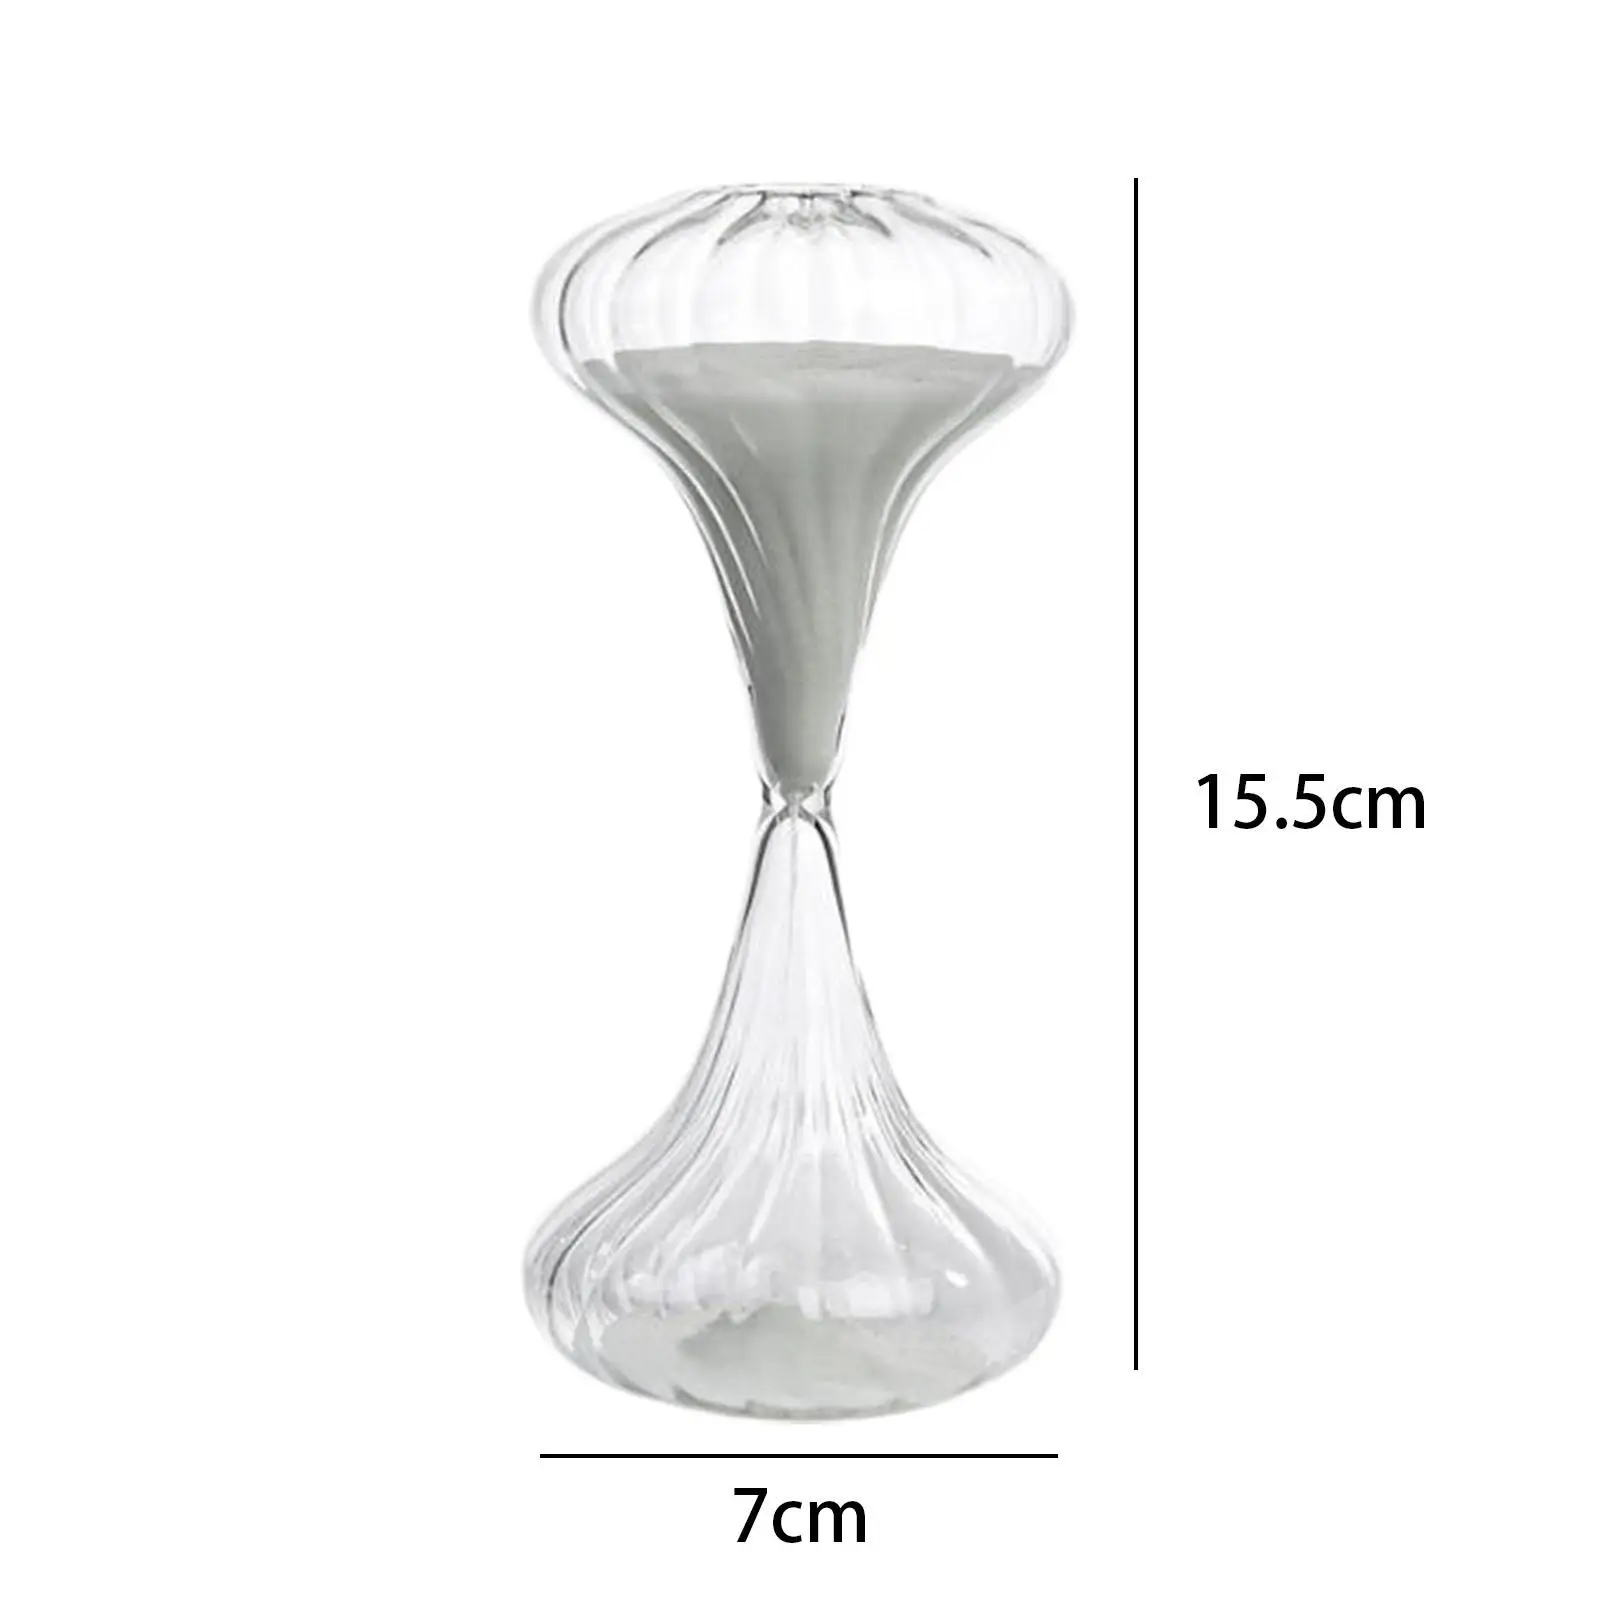 Sandglass Unique Holiday Gifts Time Management Home Decoration Glass Hourglass for Holiday Kitchen Living Room Desktop Party